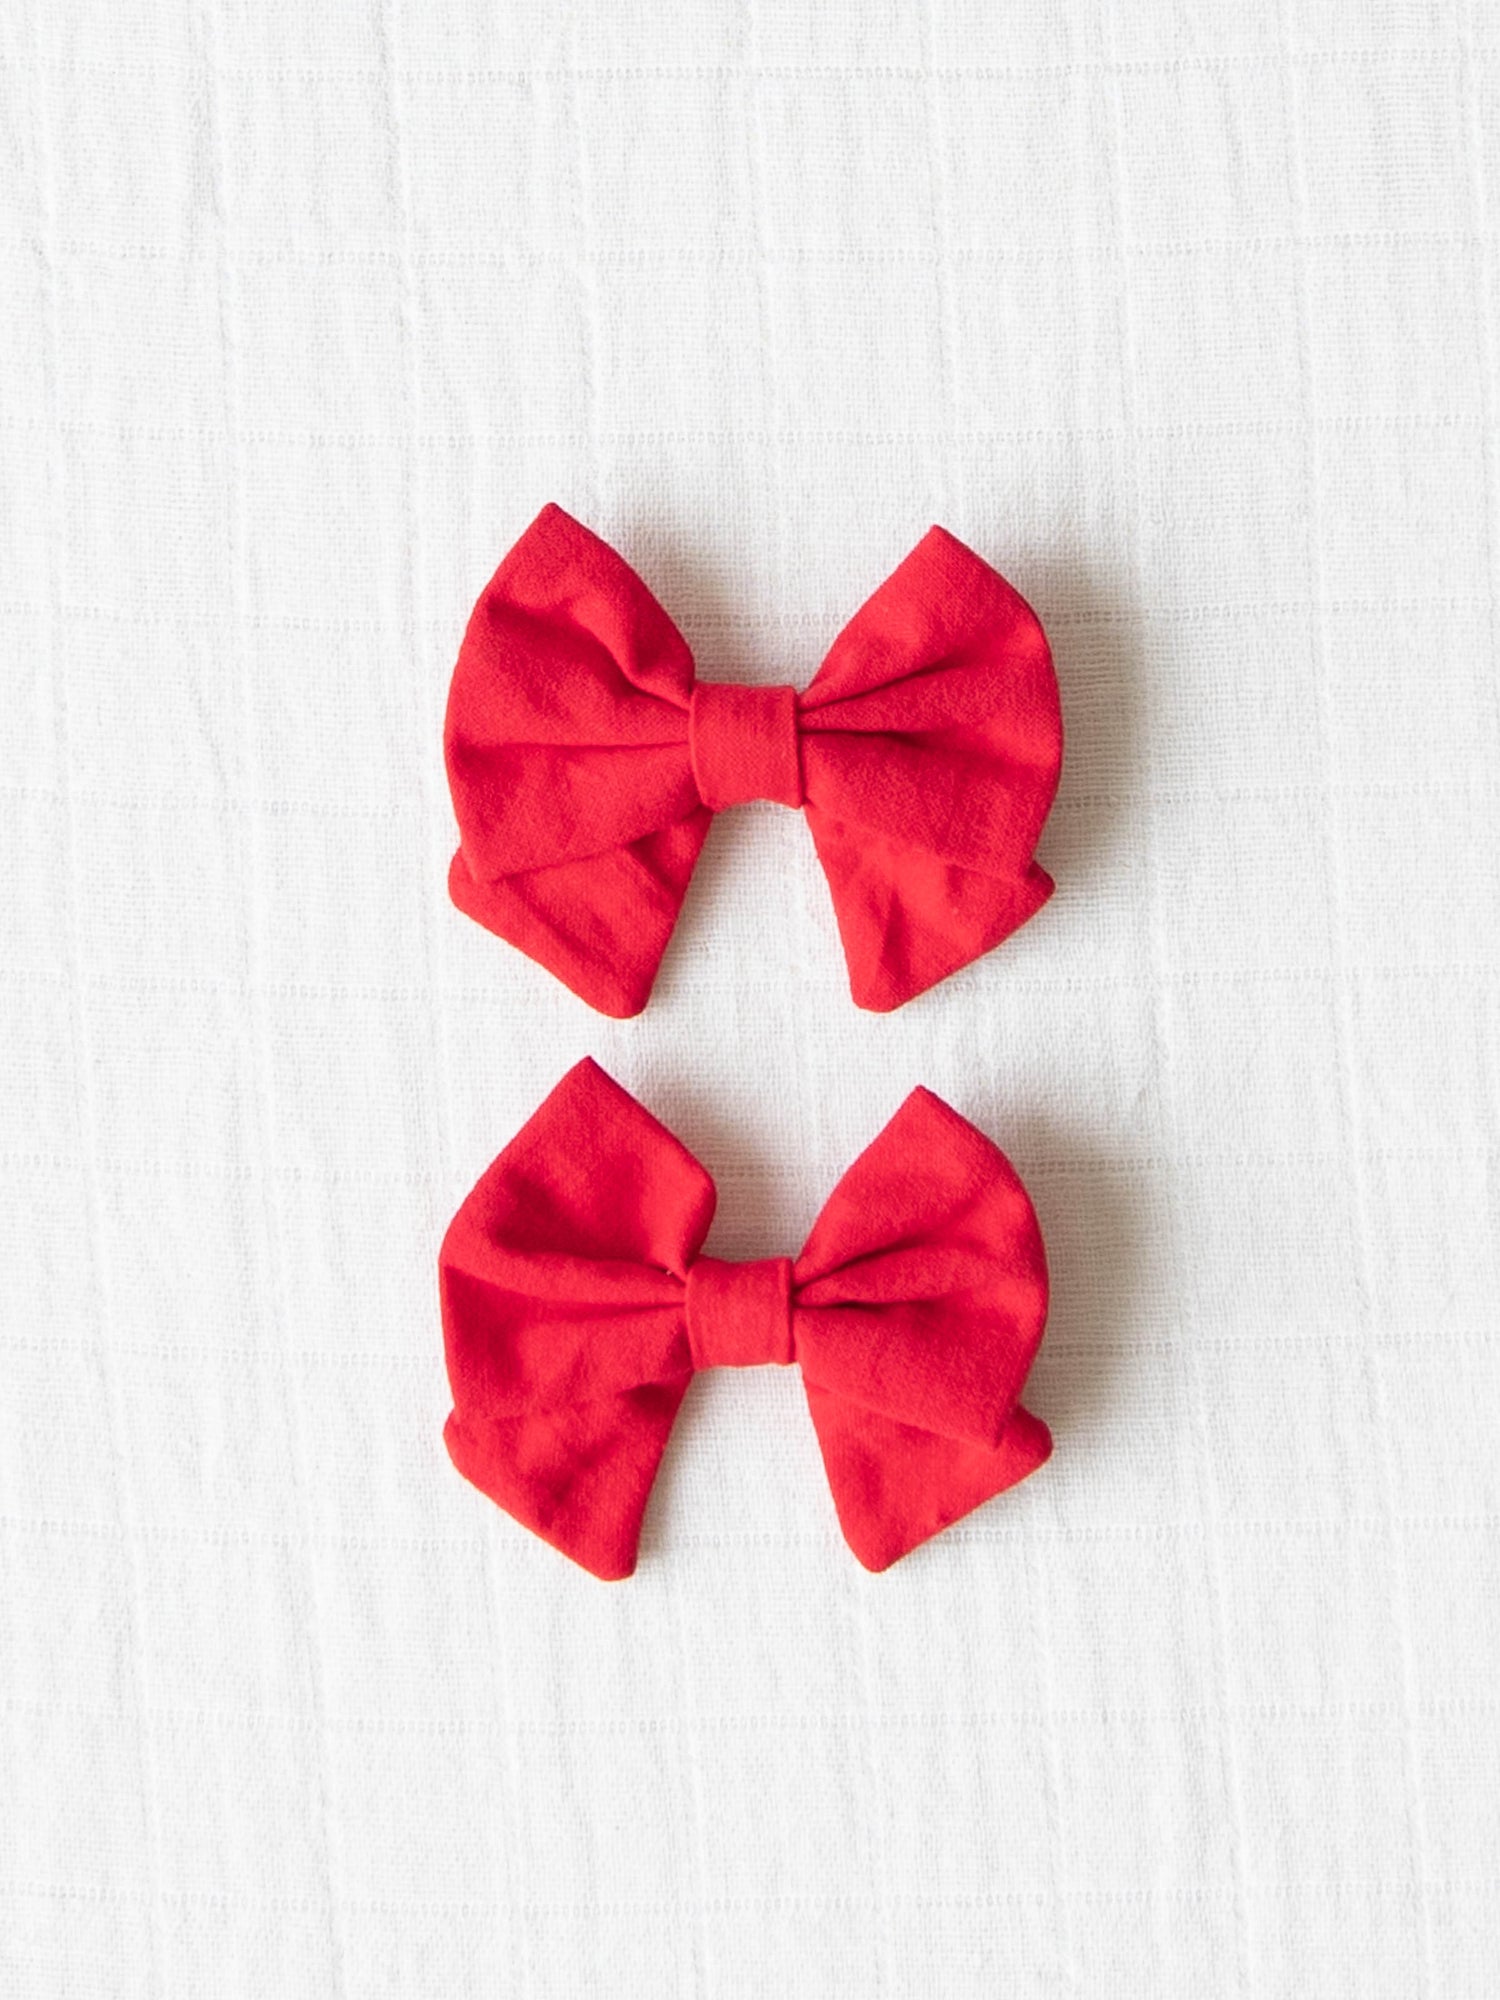 This Bow Set Duo - Red Dorothy comes in a lovely light red color.